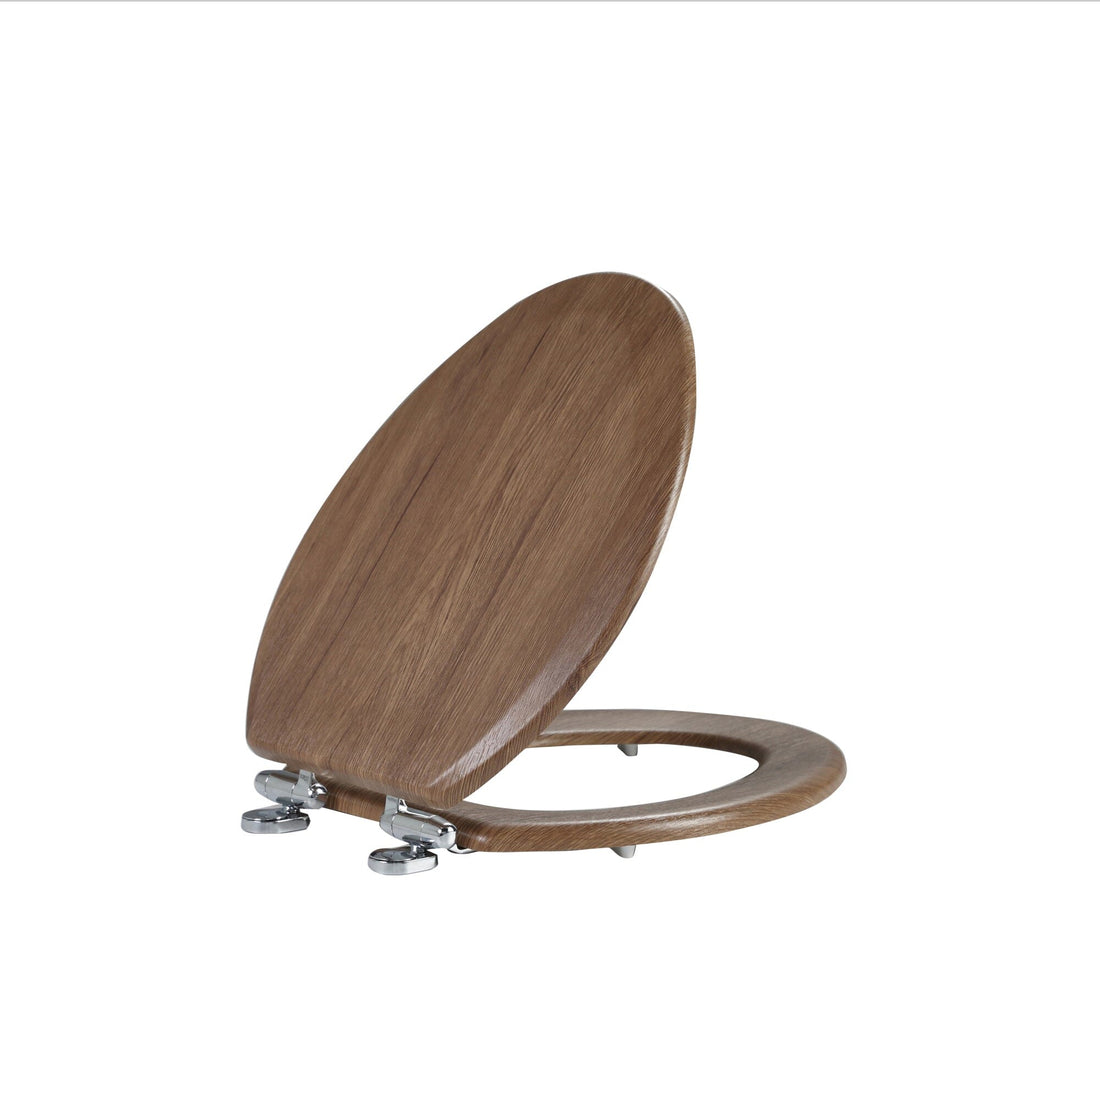 Oval Toilet Seat, Premium Molded Wood Seat with Quiet-Close Hinges